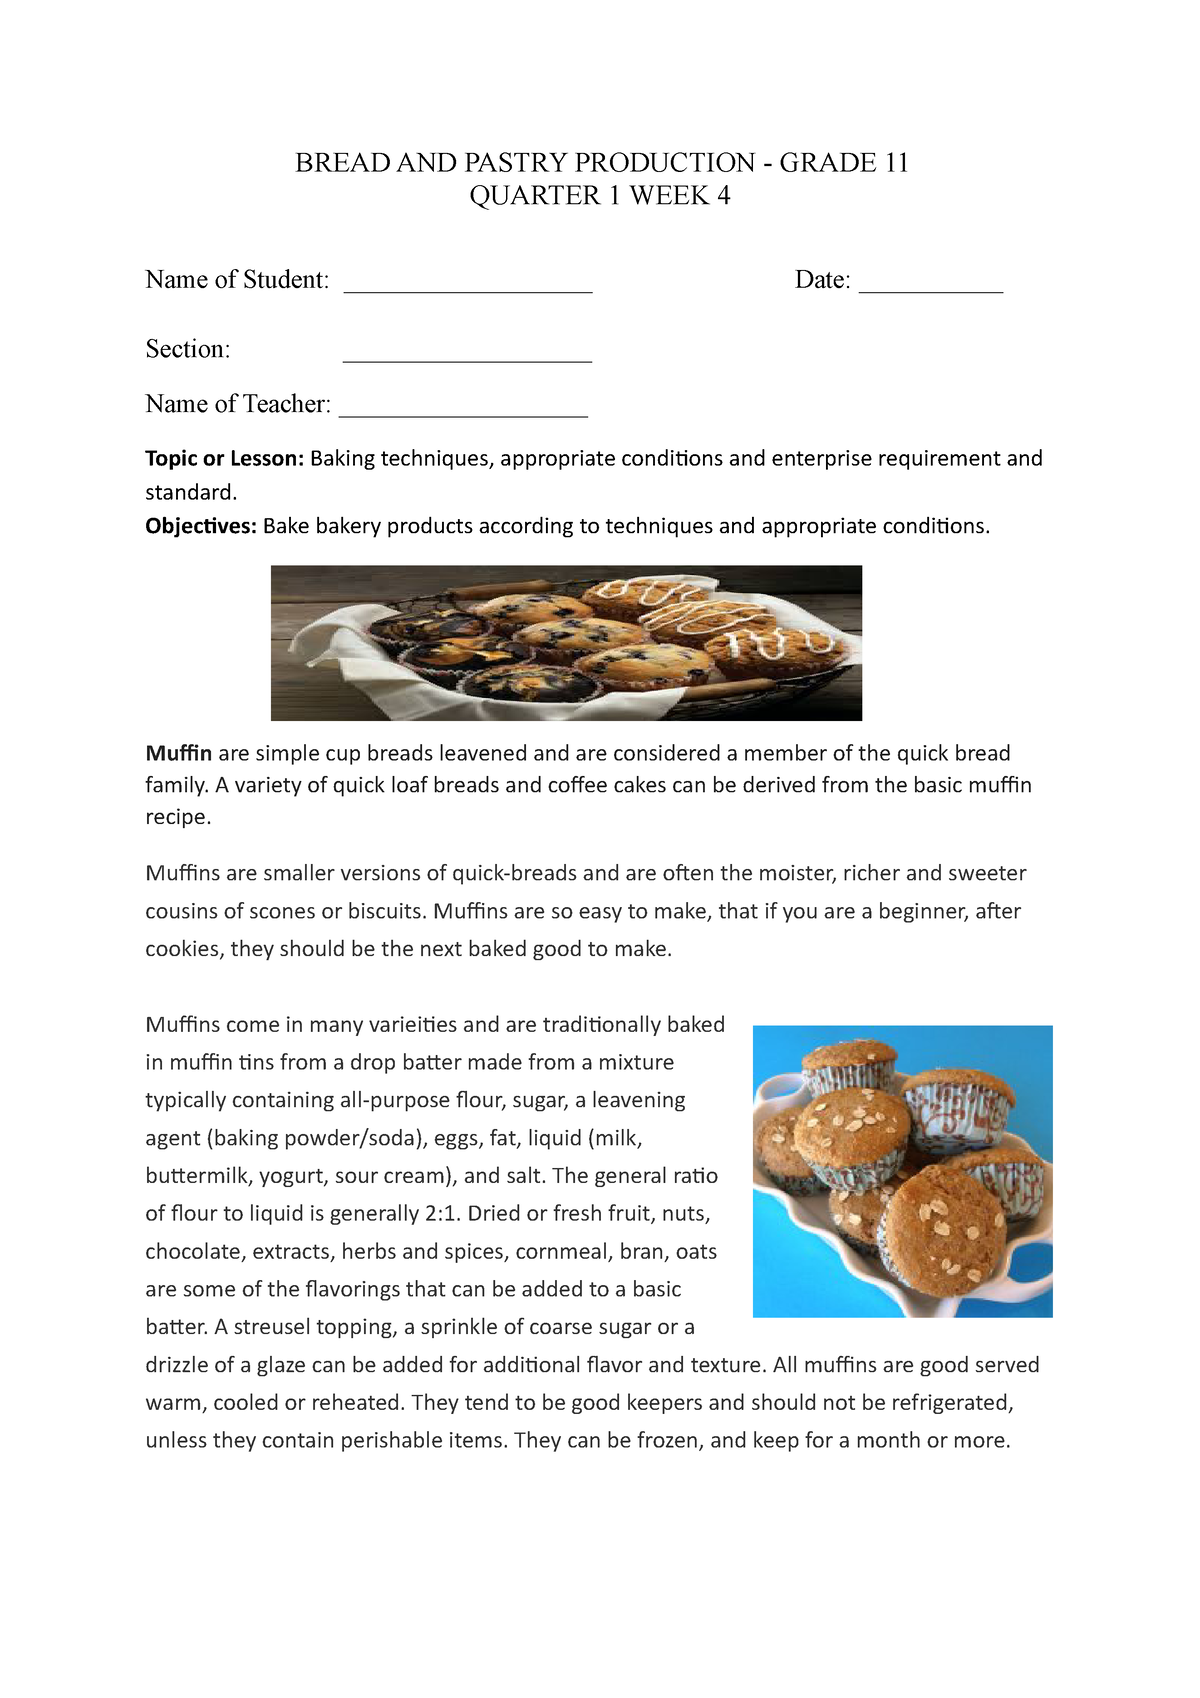 quantitative research topic about bread and pastry